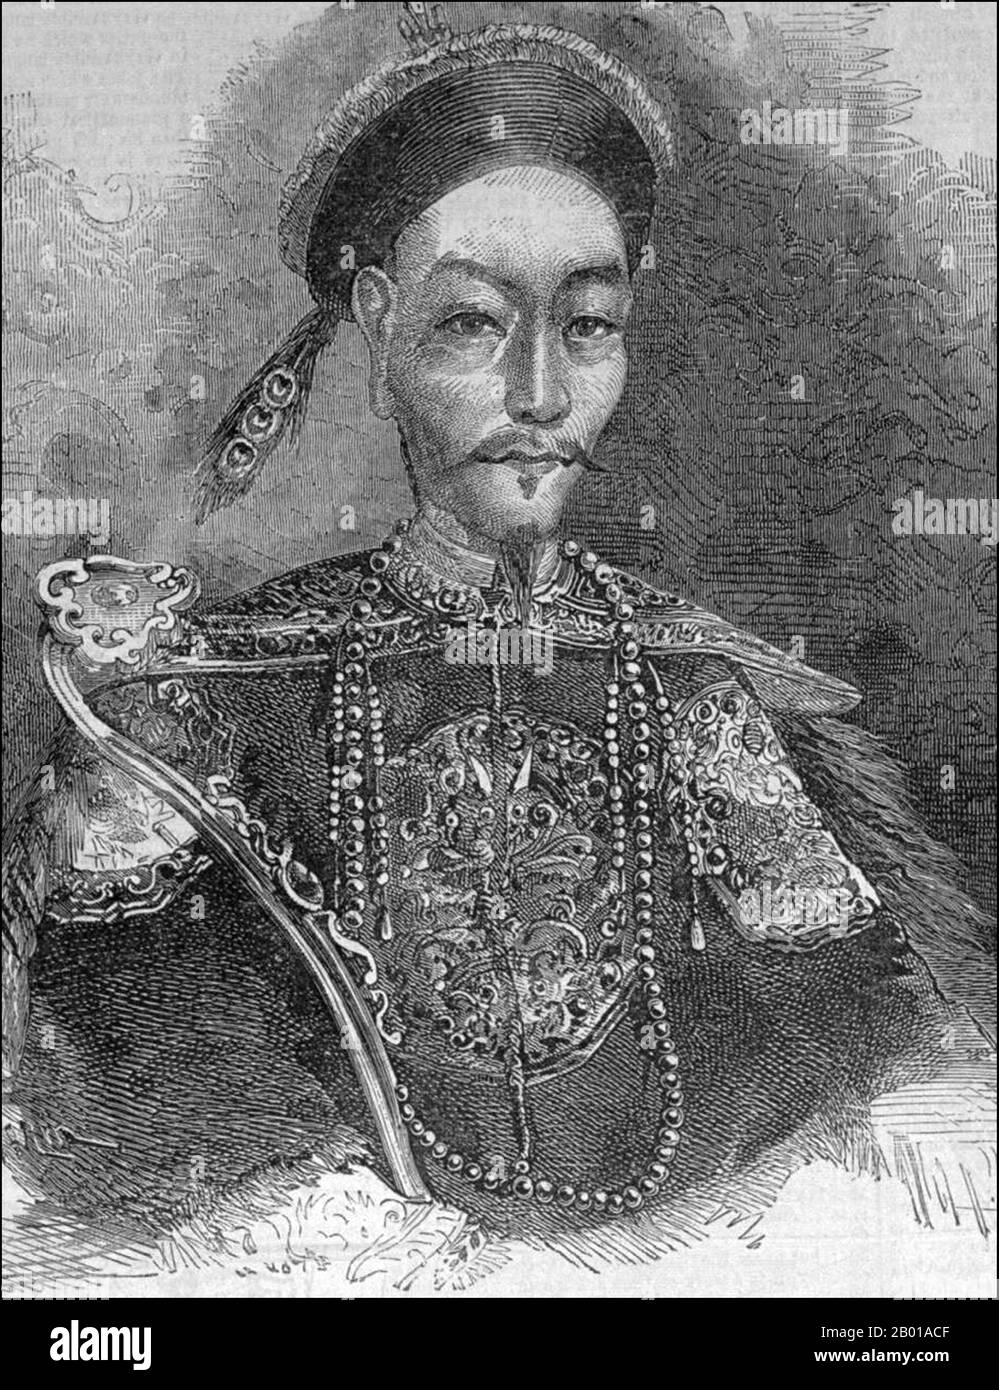 China: Western drawing of Emperor Xianfeng (17 July 1831 - 22 August 1861) of the Qing Dynasty, 19th century.  The Xianfeng Emperor (Hsien-feng), born Yizhu and temple name Wenzong, was the eighth Emperor of the Manchu-led Qing Dynasty, and the seventh Qing emperor to rule over China proper (r. 1850-1861). His reign saw the Qing Dynasty suffer several wars and rebellions, such as the Taiping Rebellion and the Second Opium War. He was the last emperor to have total ruling power, and the Qing Dynasty was controlled by Empress Dowager Cixi after his relatively young death from overindulgence. Stock Photo